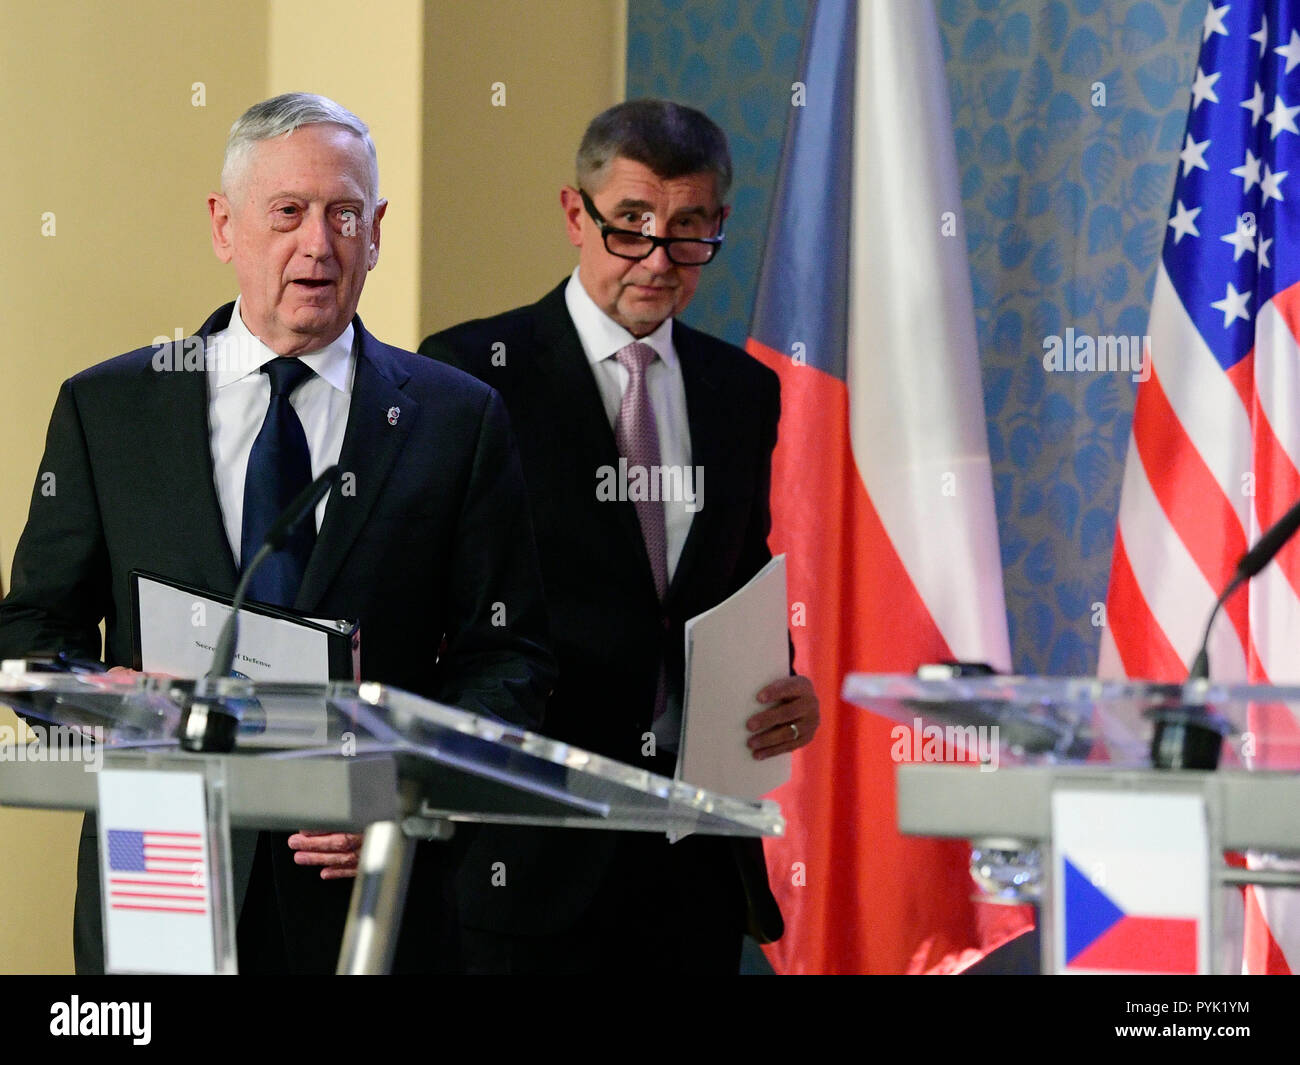 Prague, Czech Republic. 28th Oct, 2018. U.S. Defense Secretary Jim Mattis, left, with Czech Prime Minister Andrej Babis, right, are seen during a press conference in Prague, Czech Republic, Sunday, October 28, 2018. Mattis arrives in Prague to mark the 100th anniversary of the 1918 creation of the Czechoslovak state. Credit: Roman Vondrous/CTK Photo/Alamy Live News Stock Photo